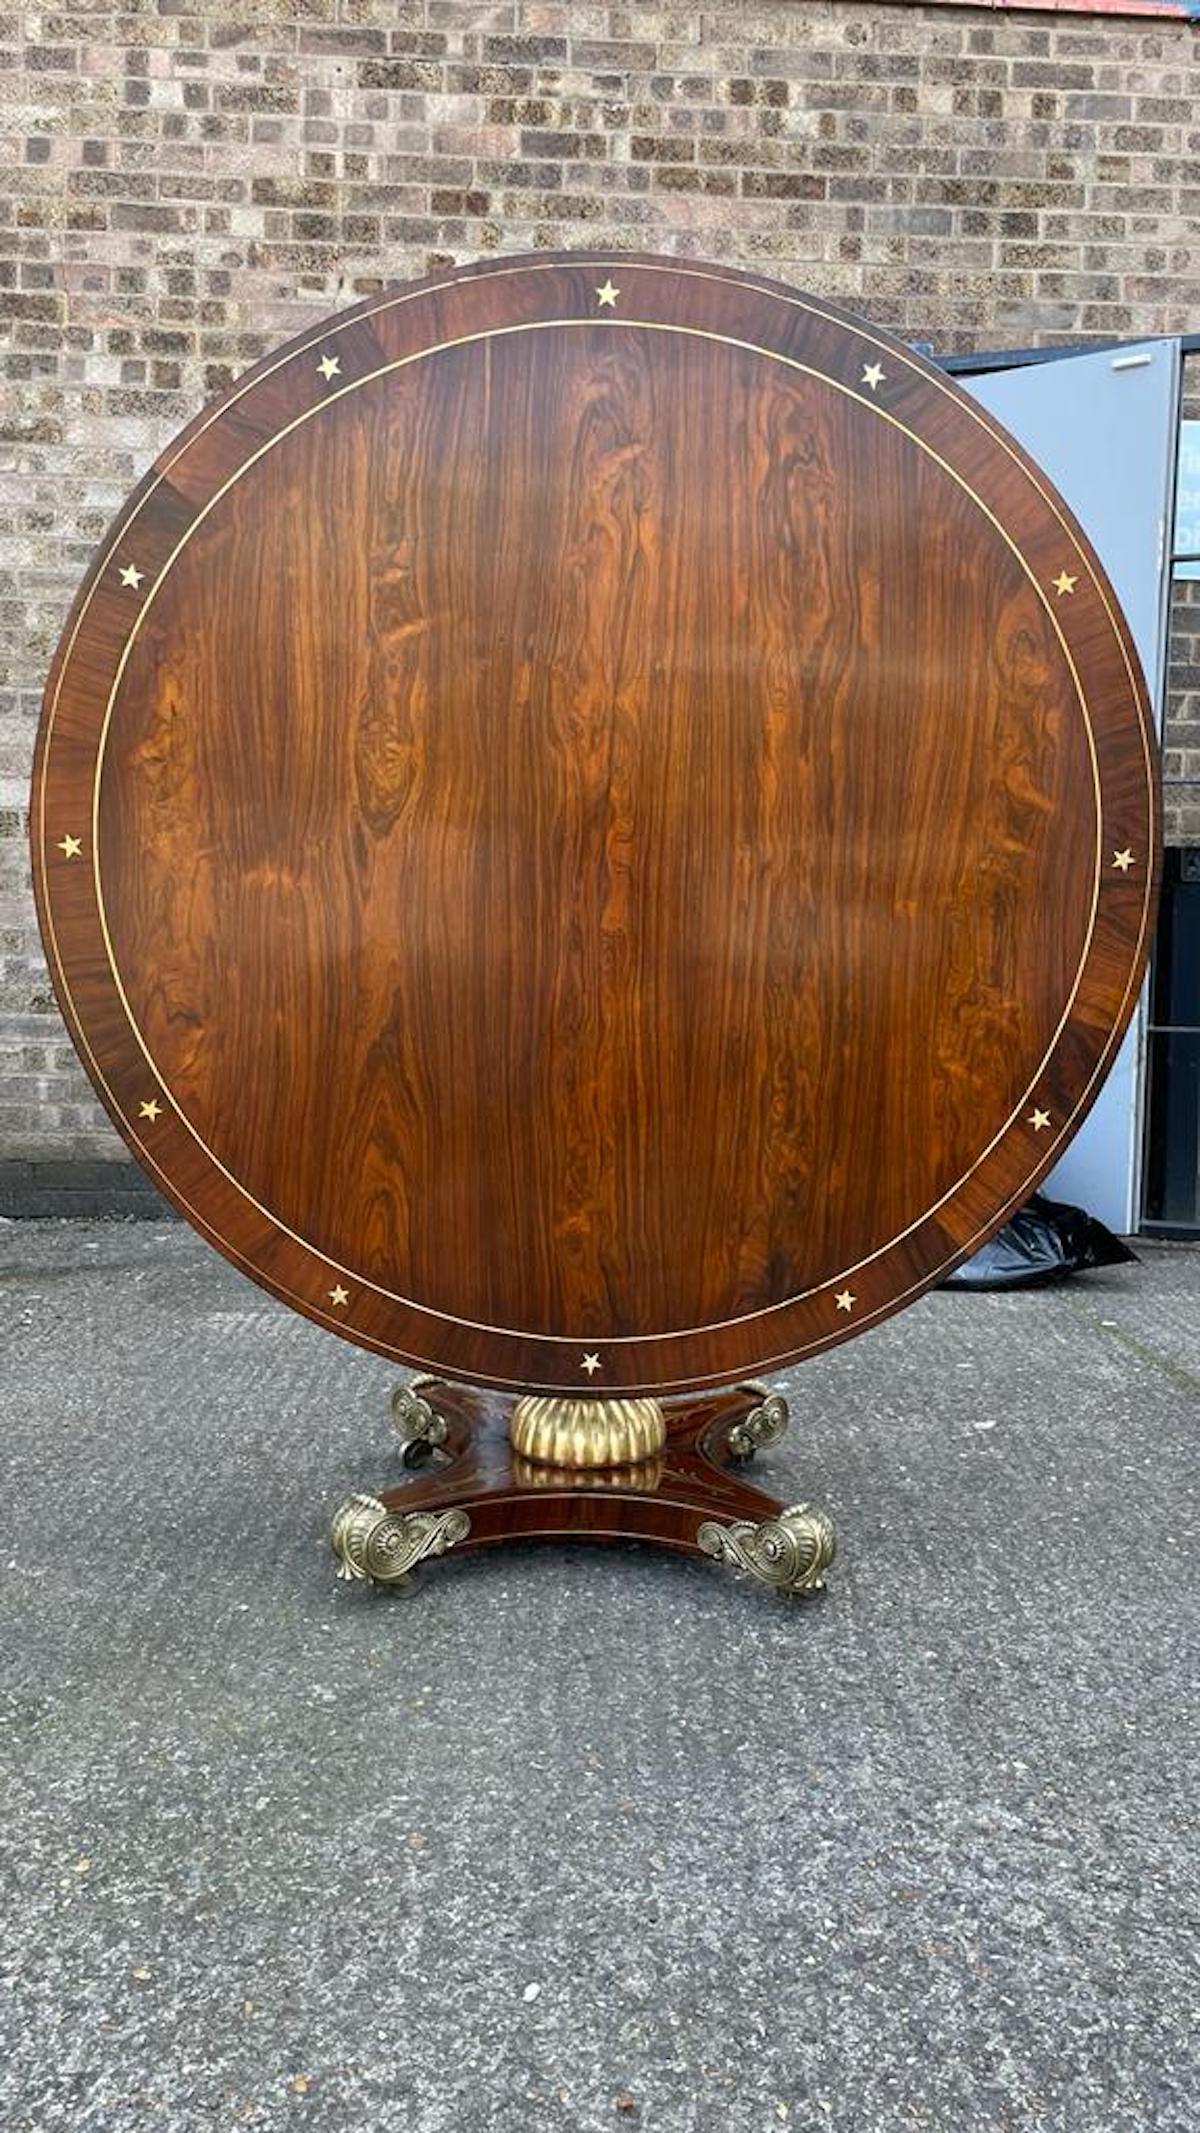 French Empire rosewood & brass-inlaid dining table, 19th century.
Early 19th century rosewood breakfast / center / dining table. This is simply the finest in craftsmanship. The gilt gold reverse claw feet on a boule inlaid base with gilt column